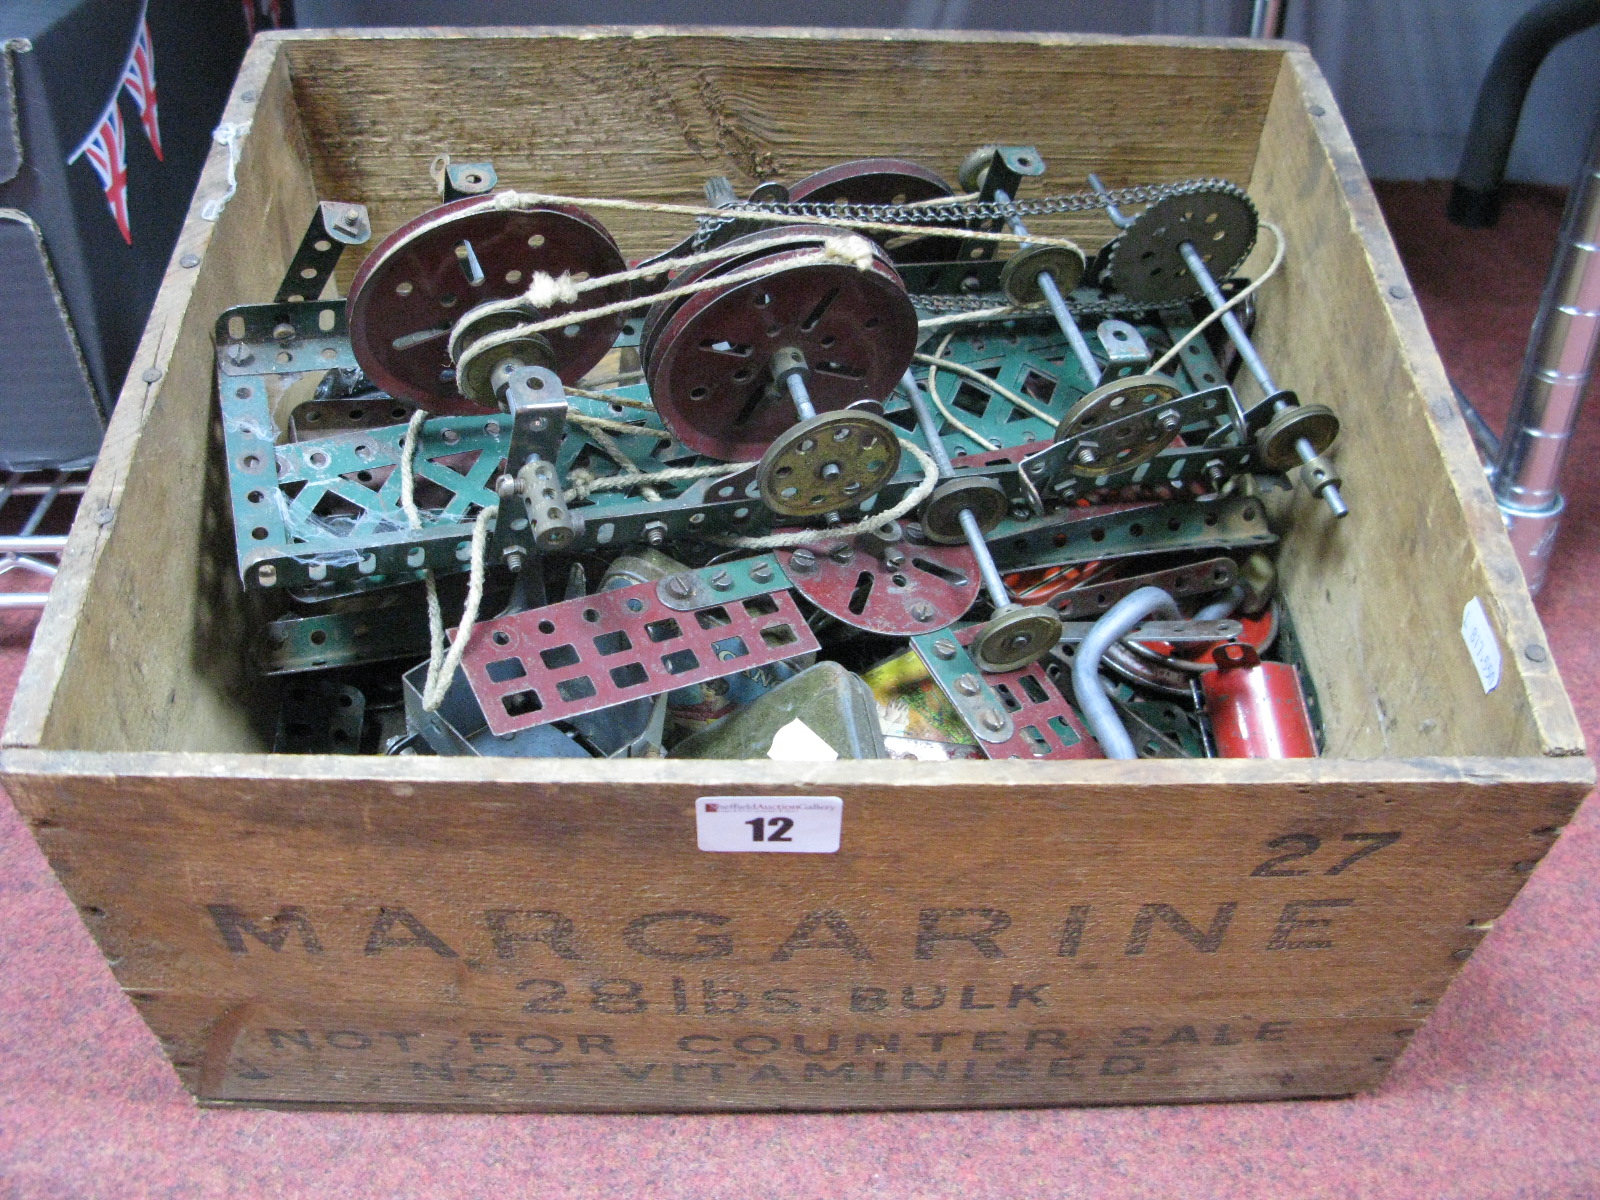 A Quantity of Mainly Pre-War Red and Green Meccano, and associated items, all playworn.